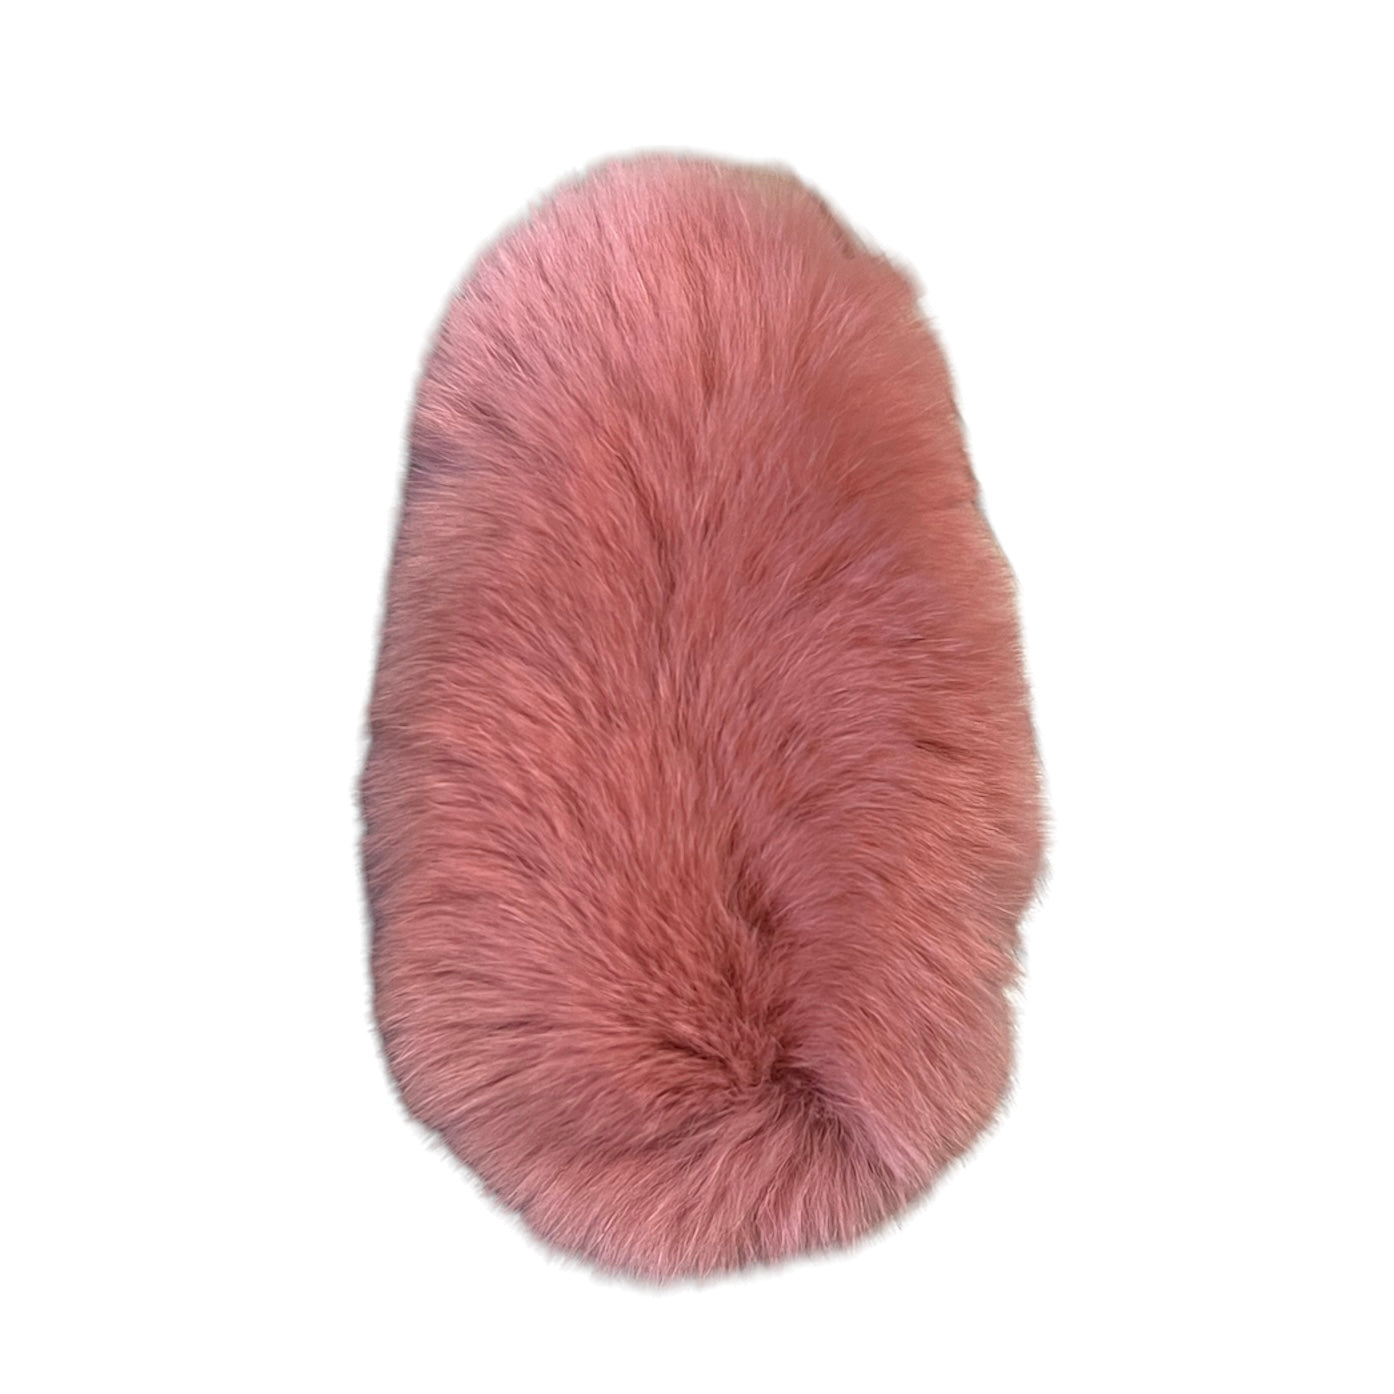 Super fluffy Giant hairclip Pink